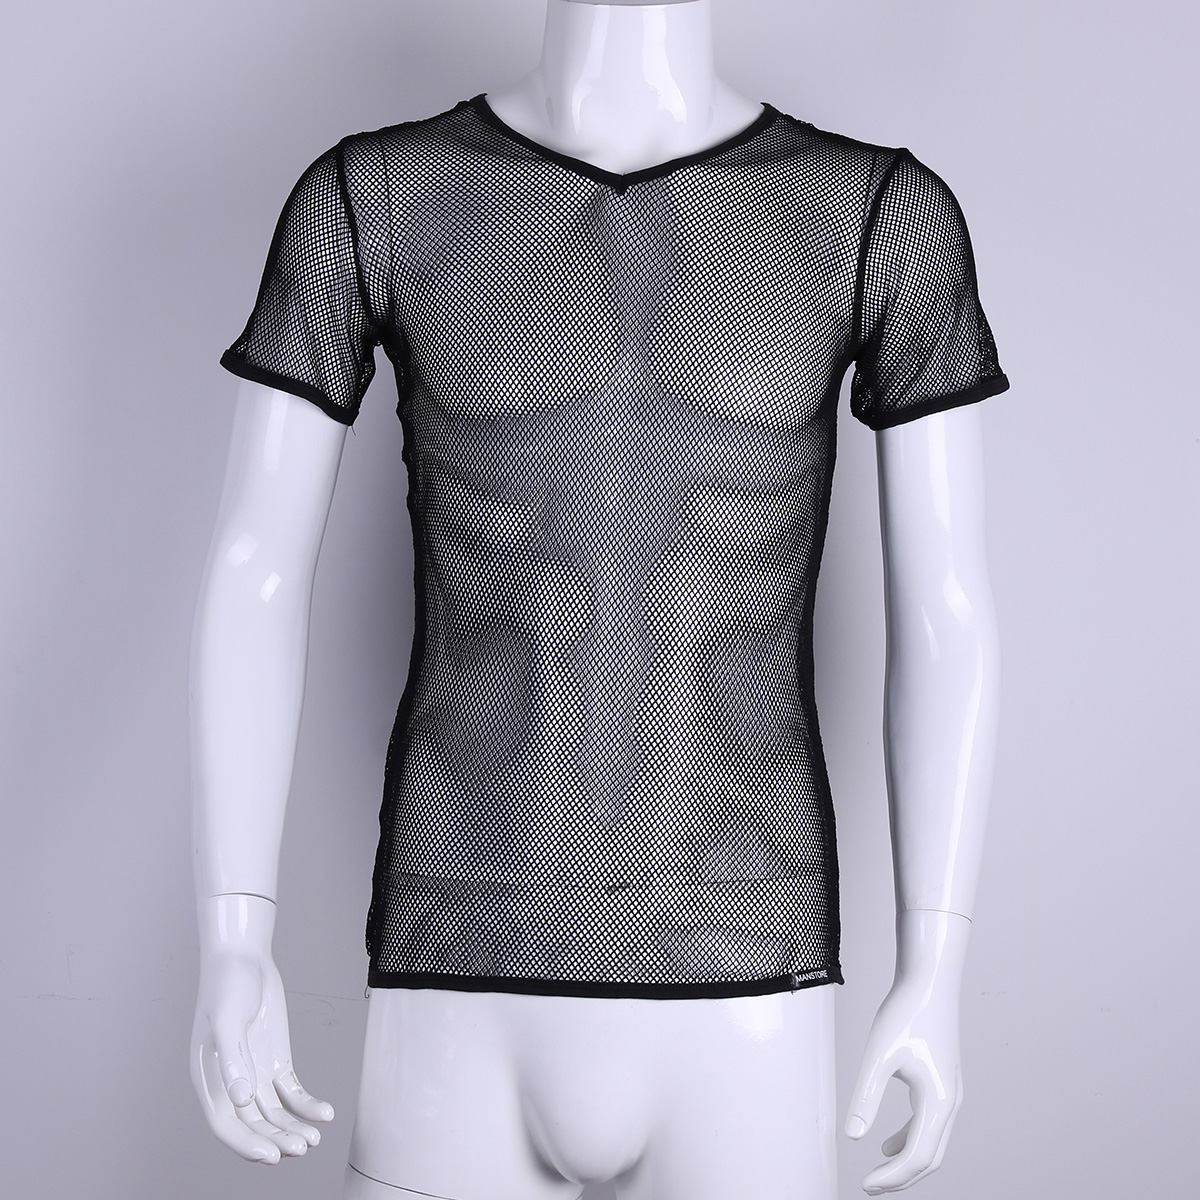 Mesh Top See Through Fishnet Vest T-Shirt / Breathable Top for Men in Alternative Style - HARD'N'HEAVY